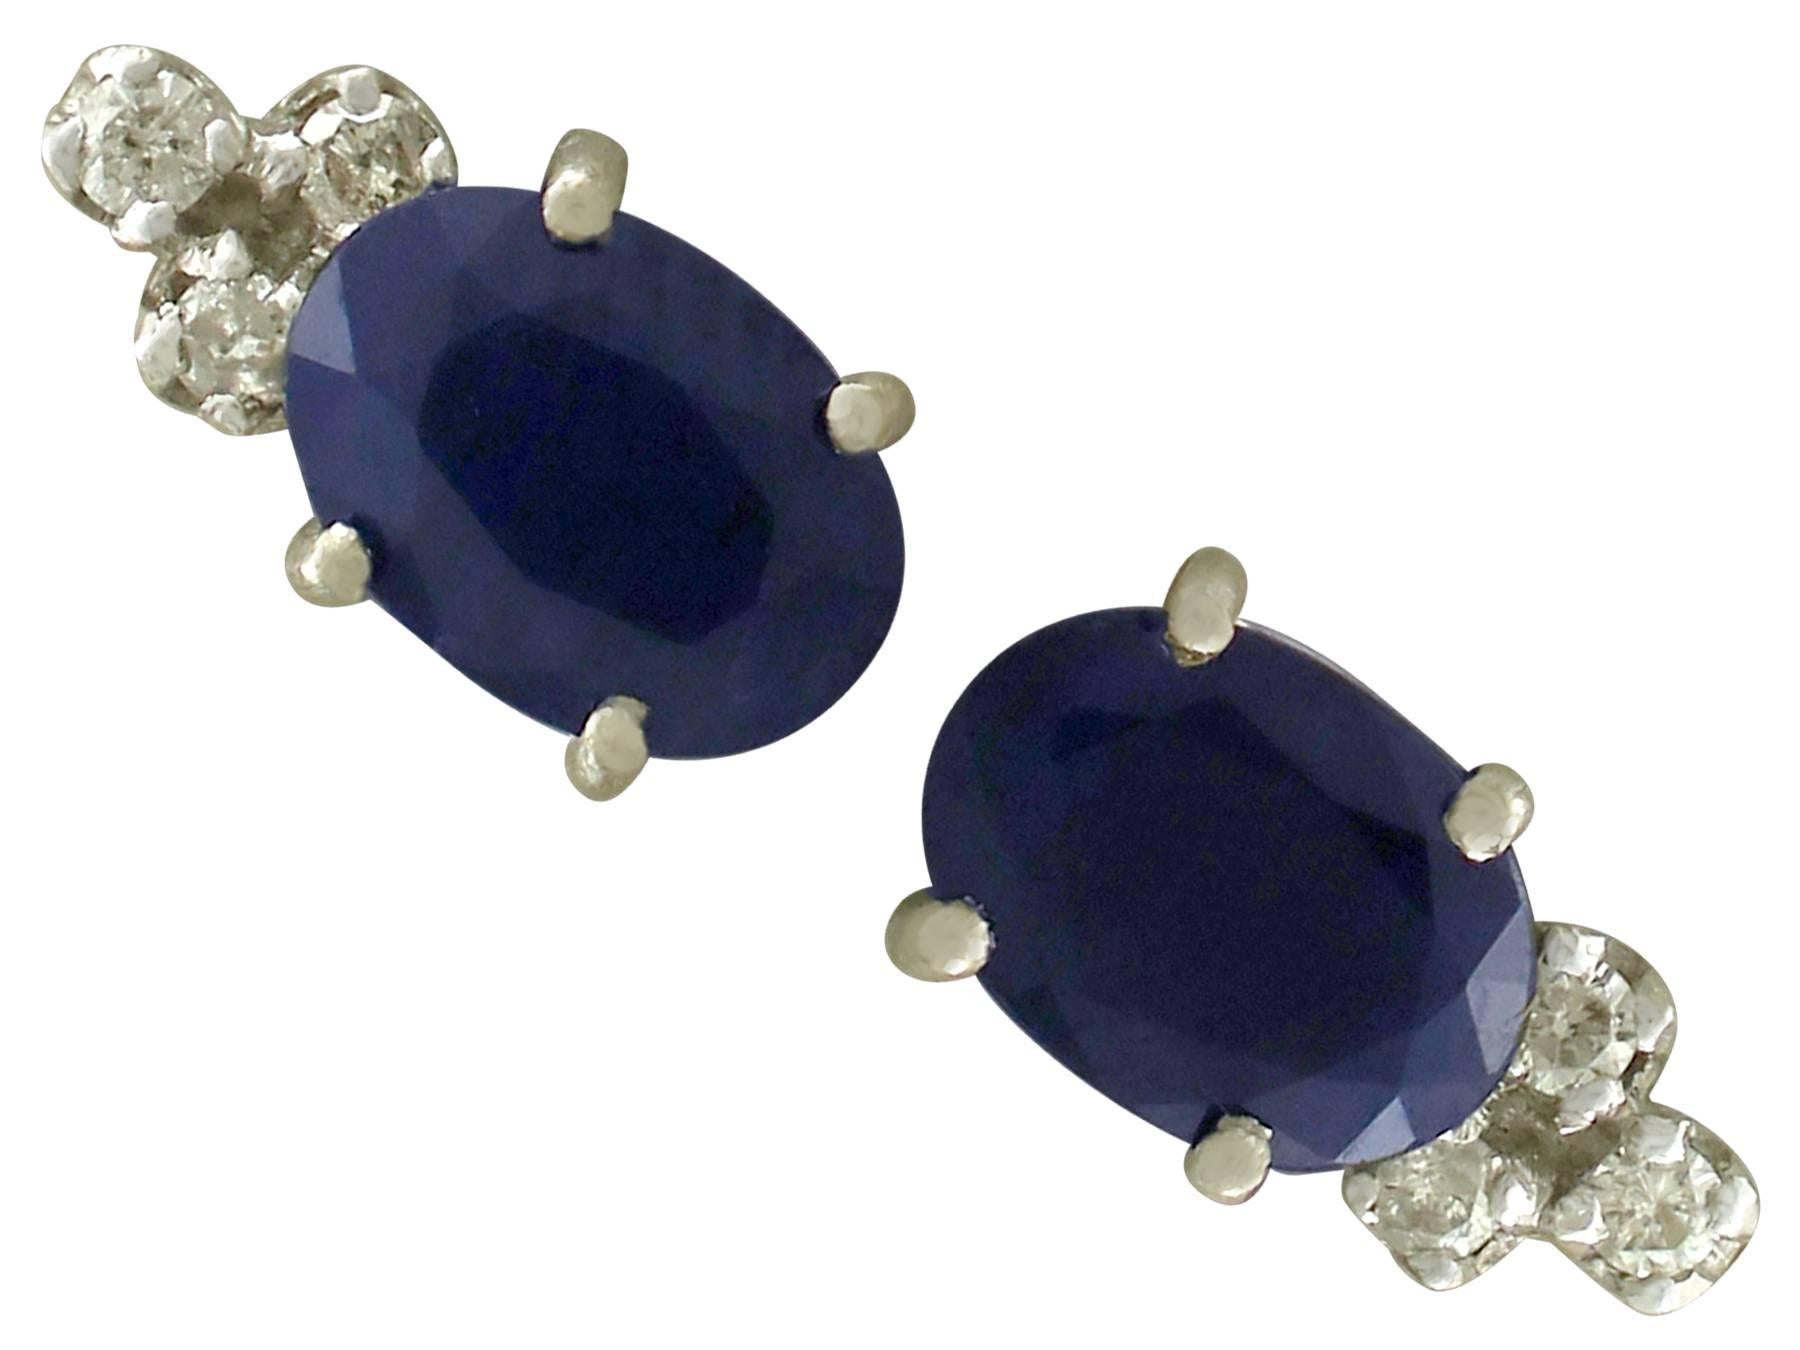 An impressive pair of 1.82 carat sapphire and 0.09 carat diamond, 18 carat white gold stud earrings; part of our diverse antique jewellery and estate jewelry collections.

These fine and impressive blue sapphire and diamond stud earrings have been